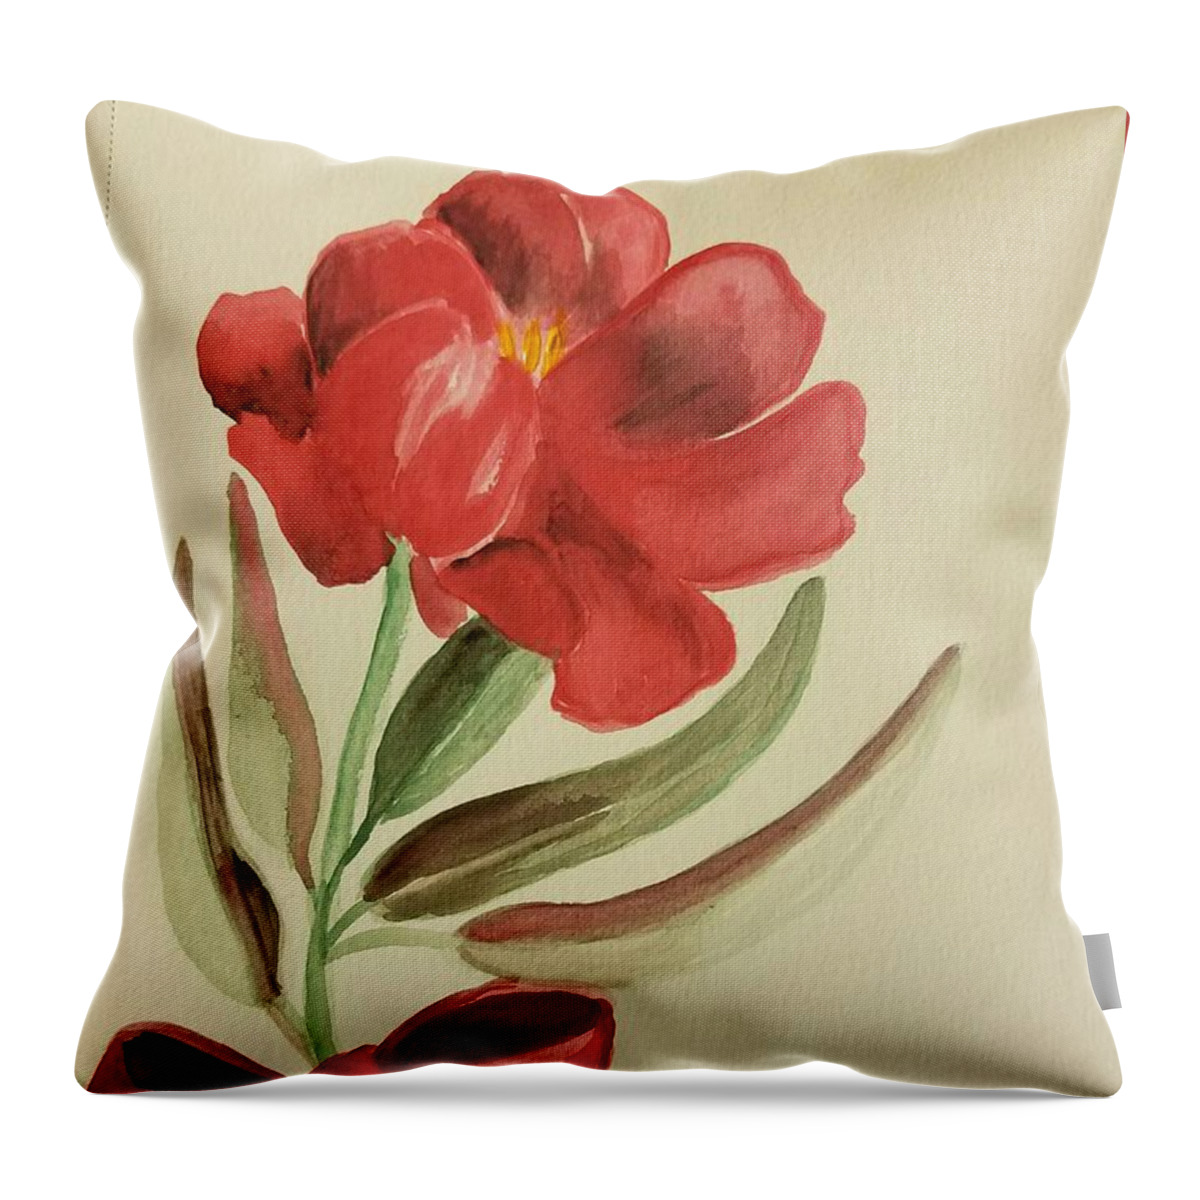 Red Lady Throw Pillow featuring the painting Red Lady by Maria Urso